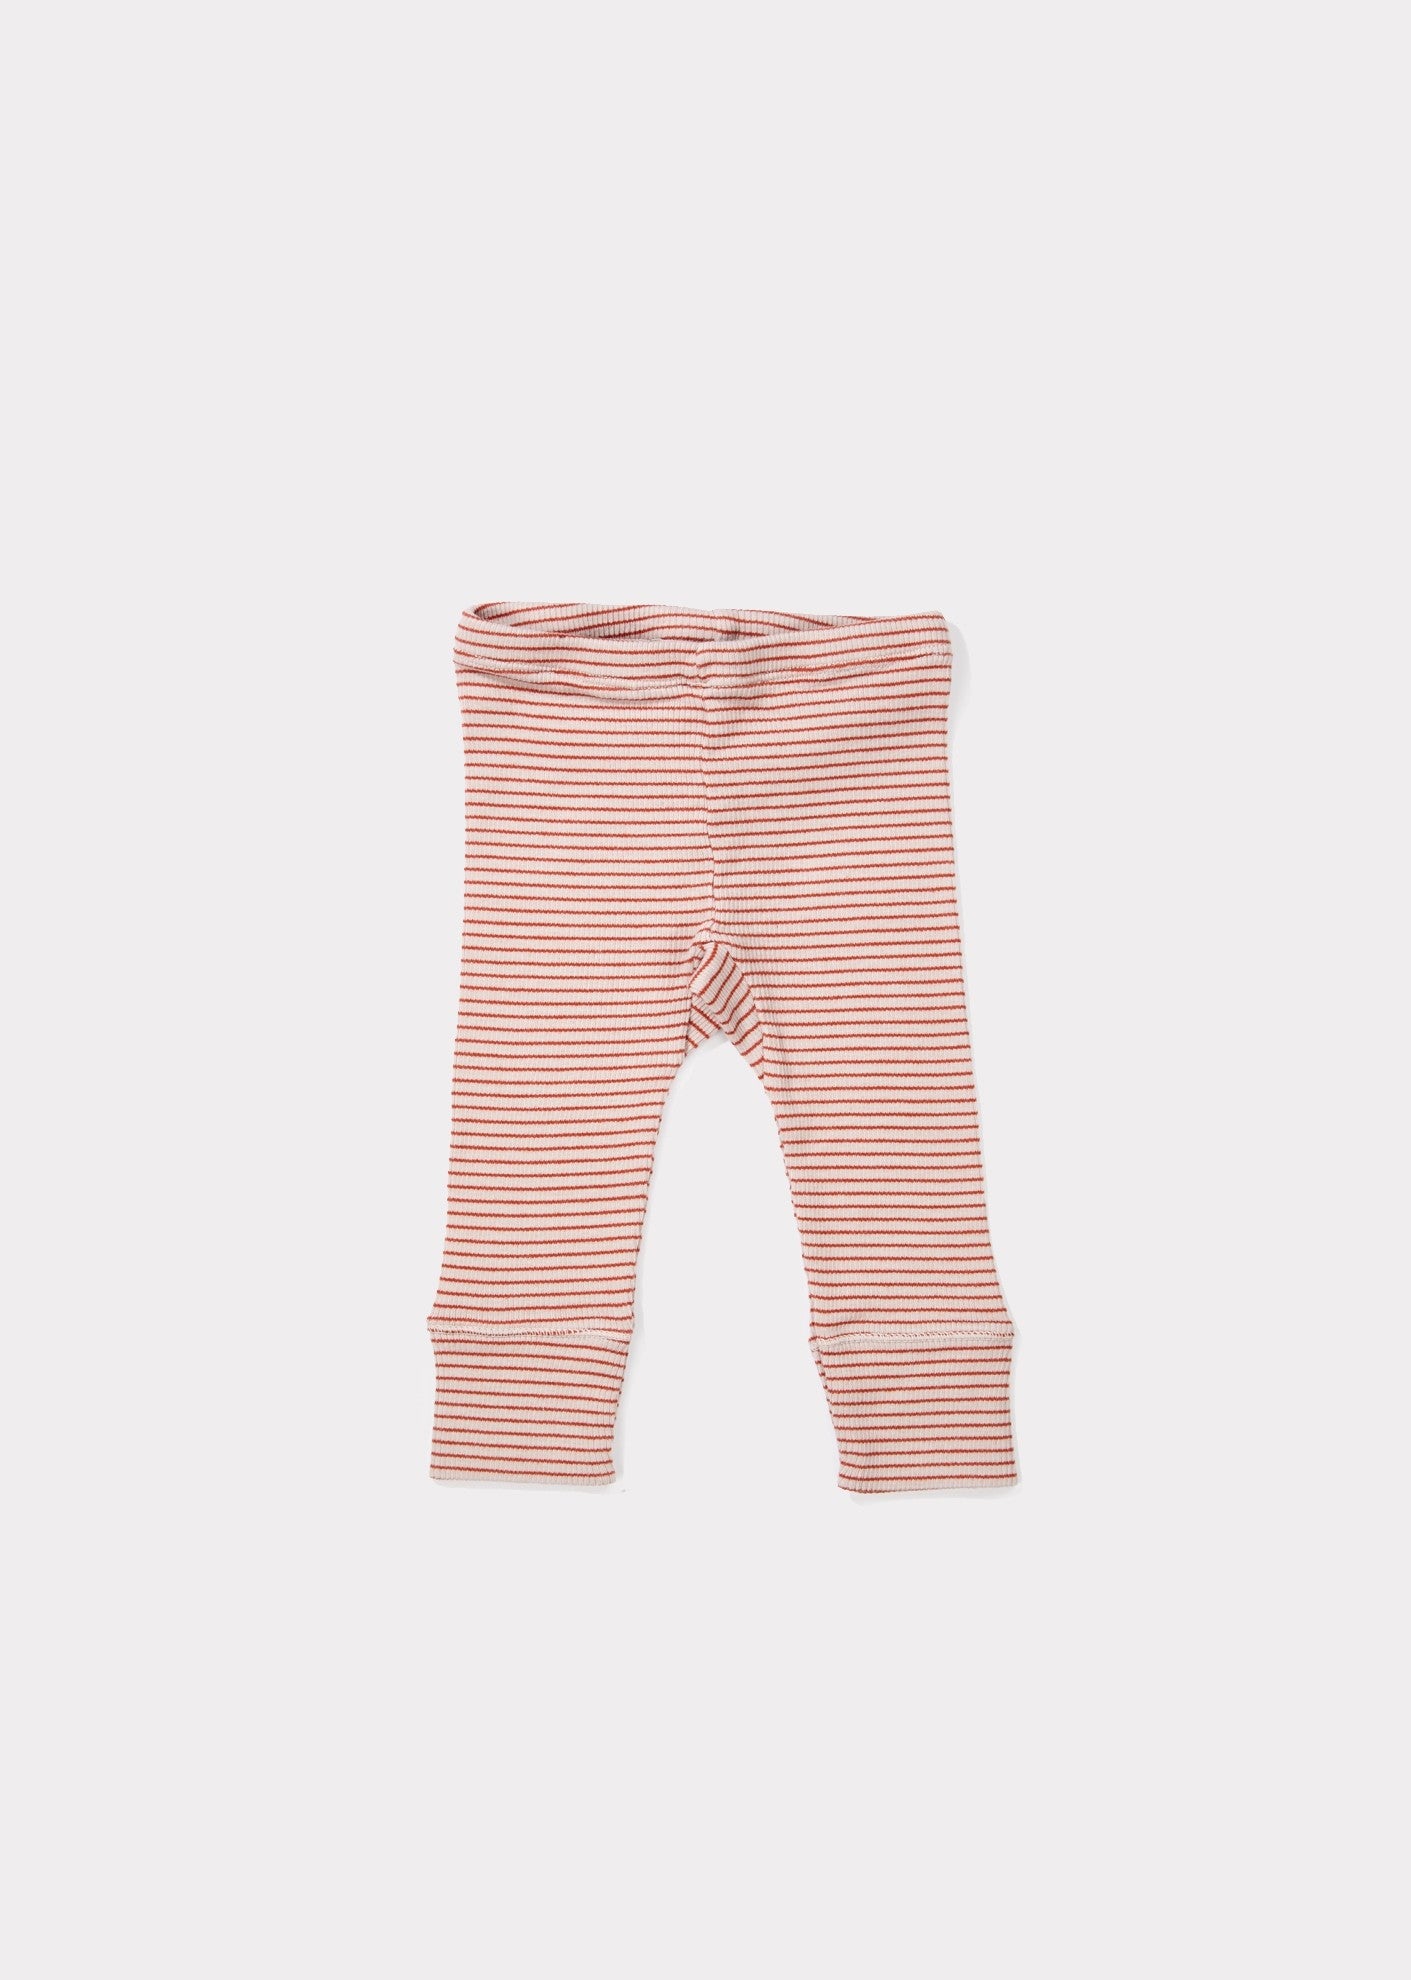 Baby Girls Lavender & Rust Cotton Trousers